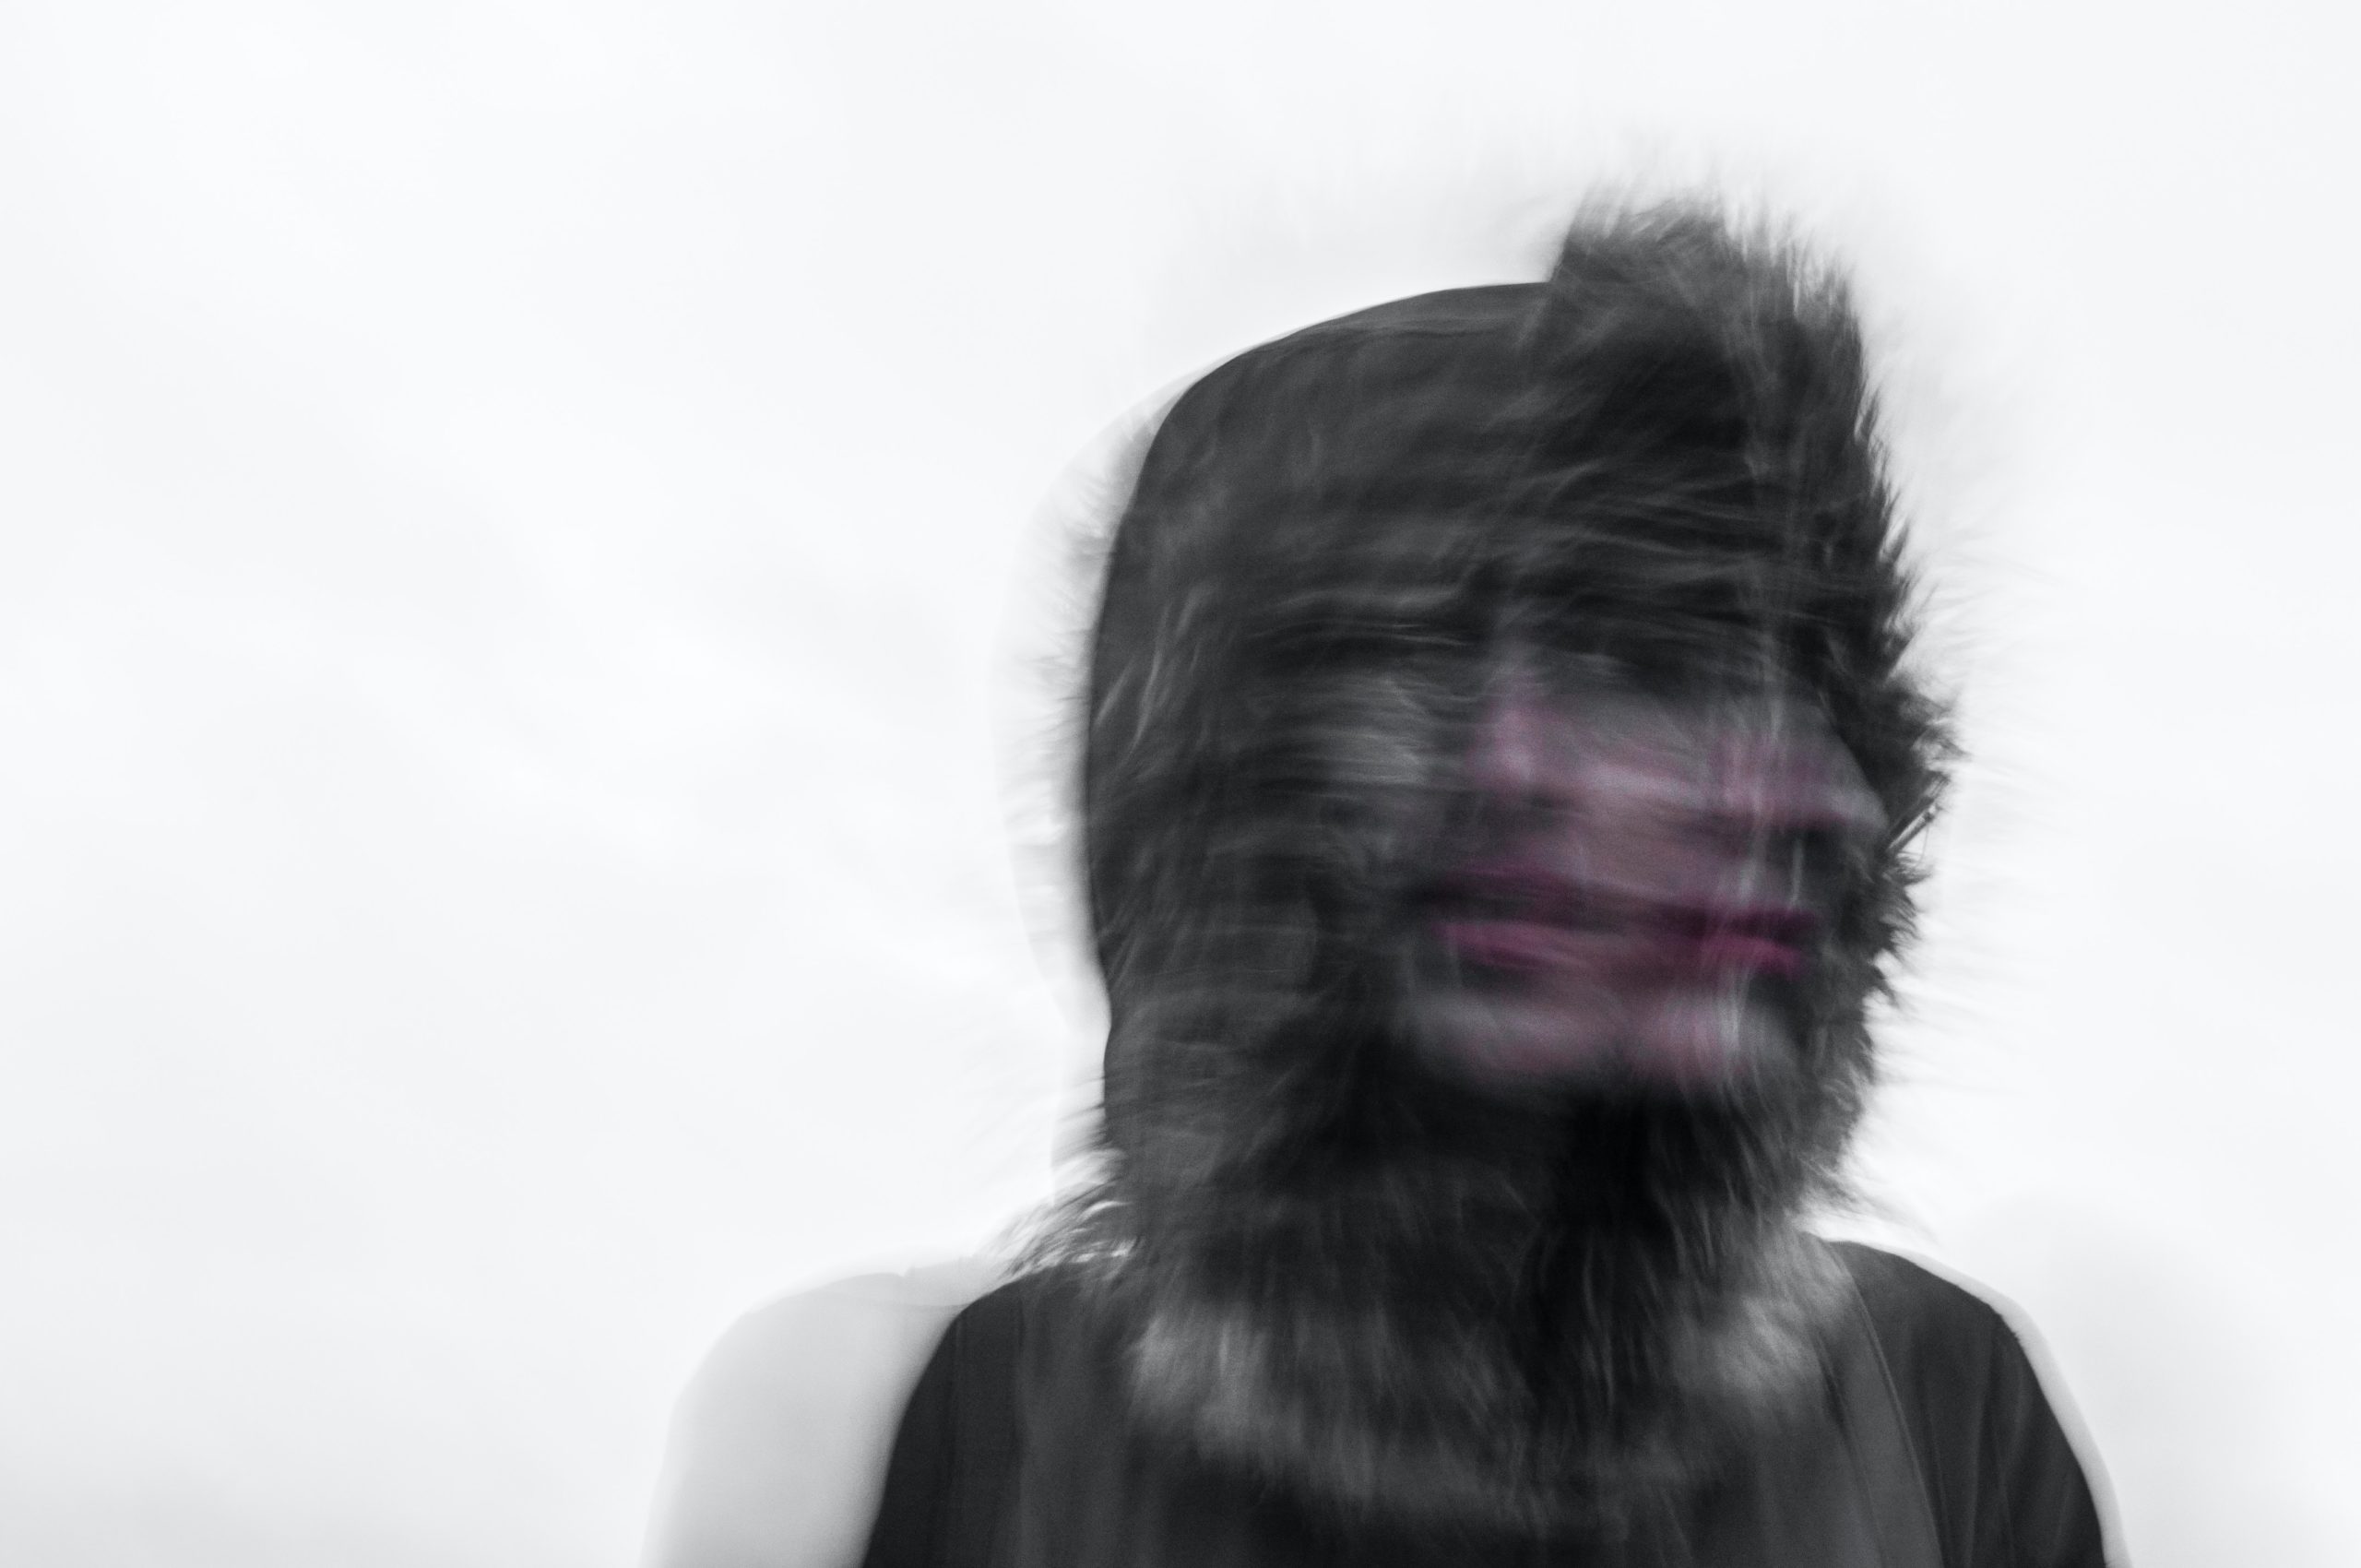 A blurry, superimposed image of a woman in a fur hood looking away.